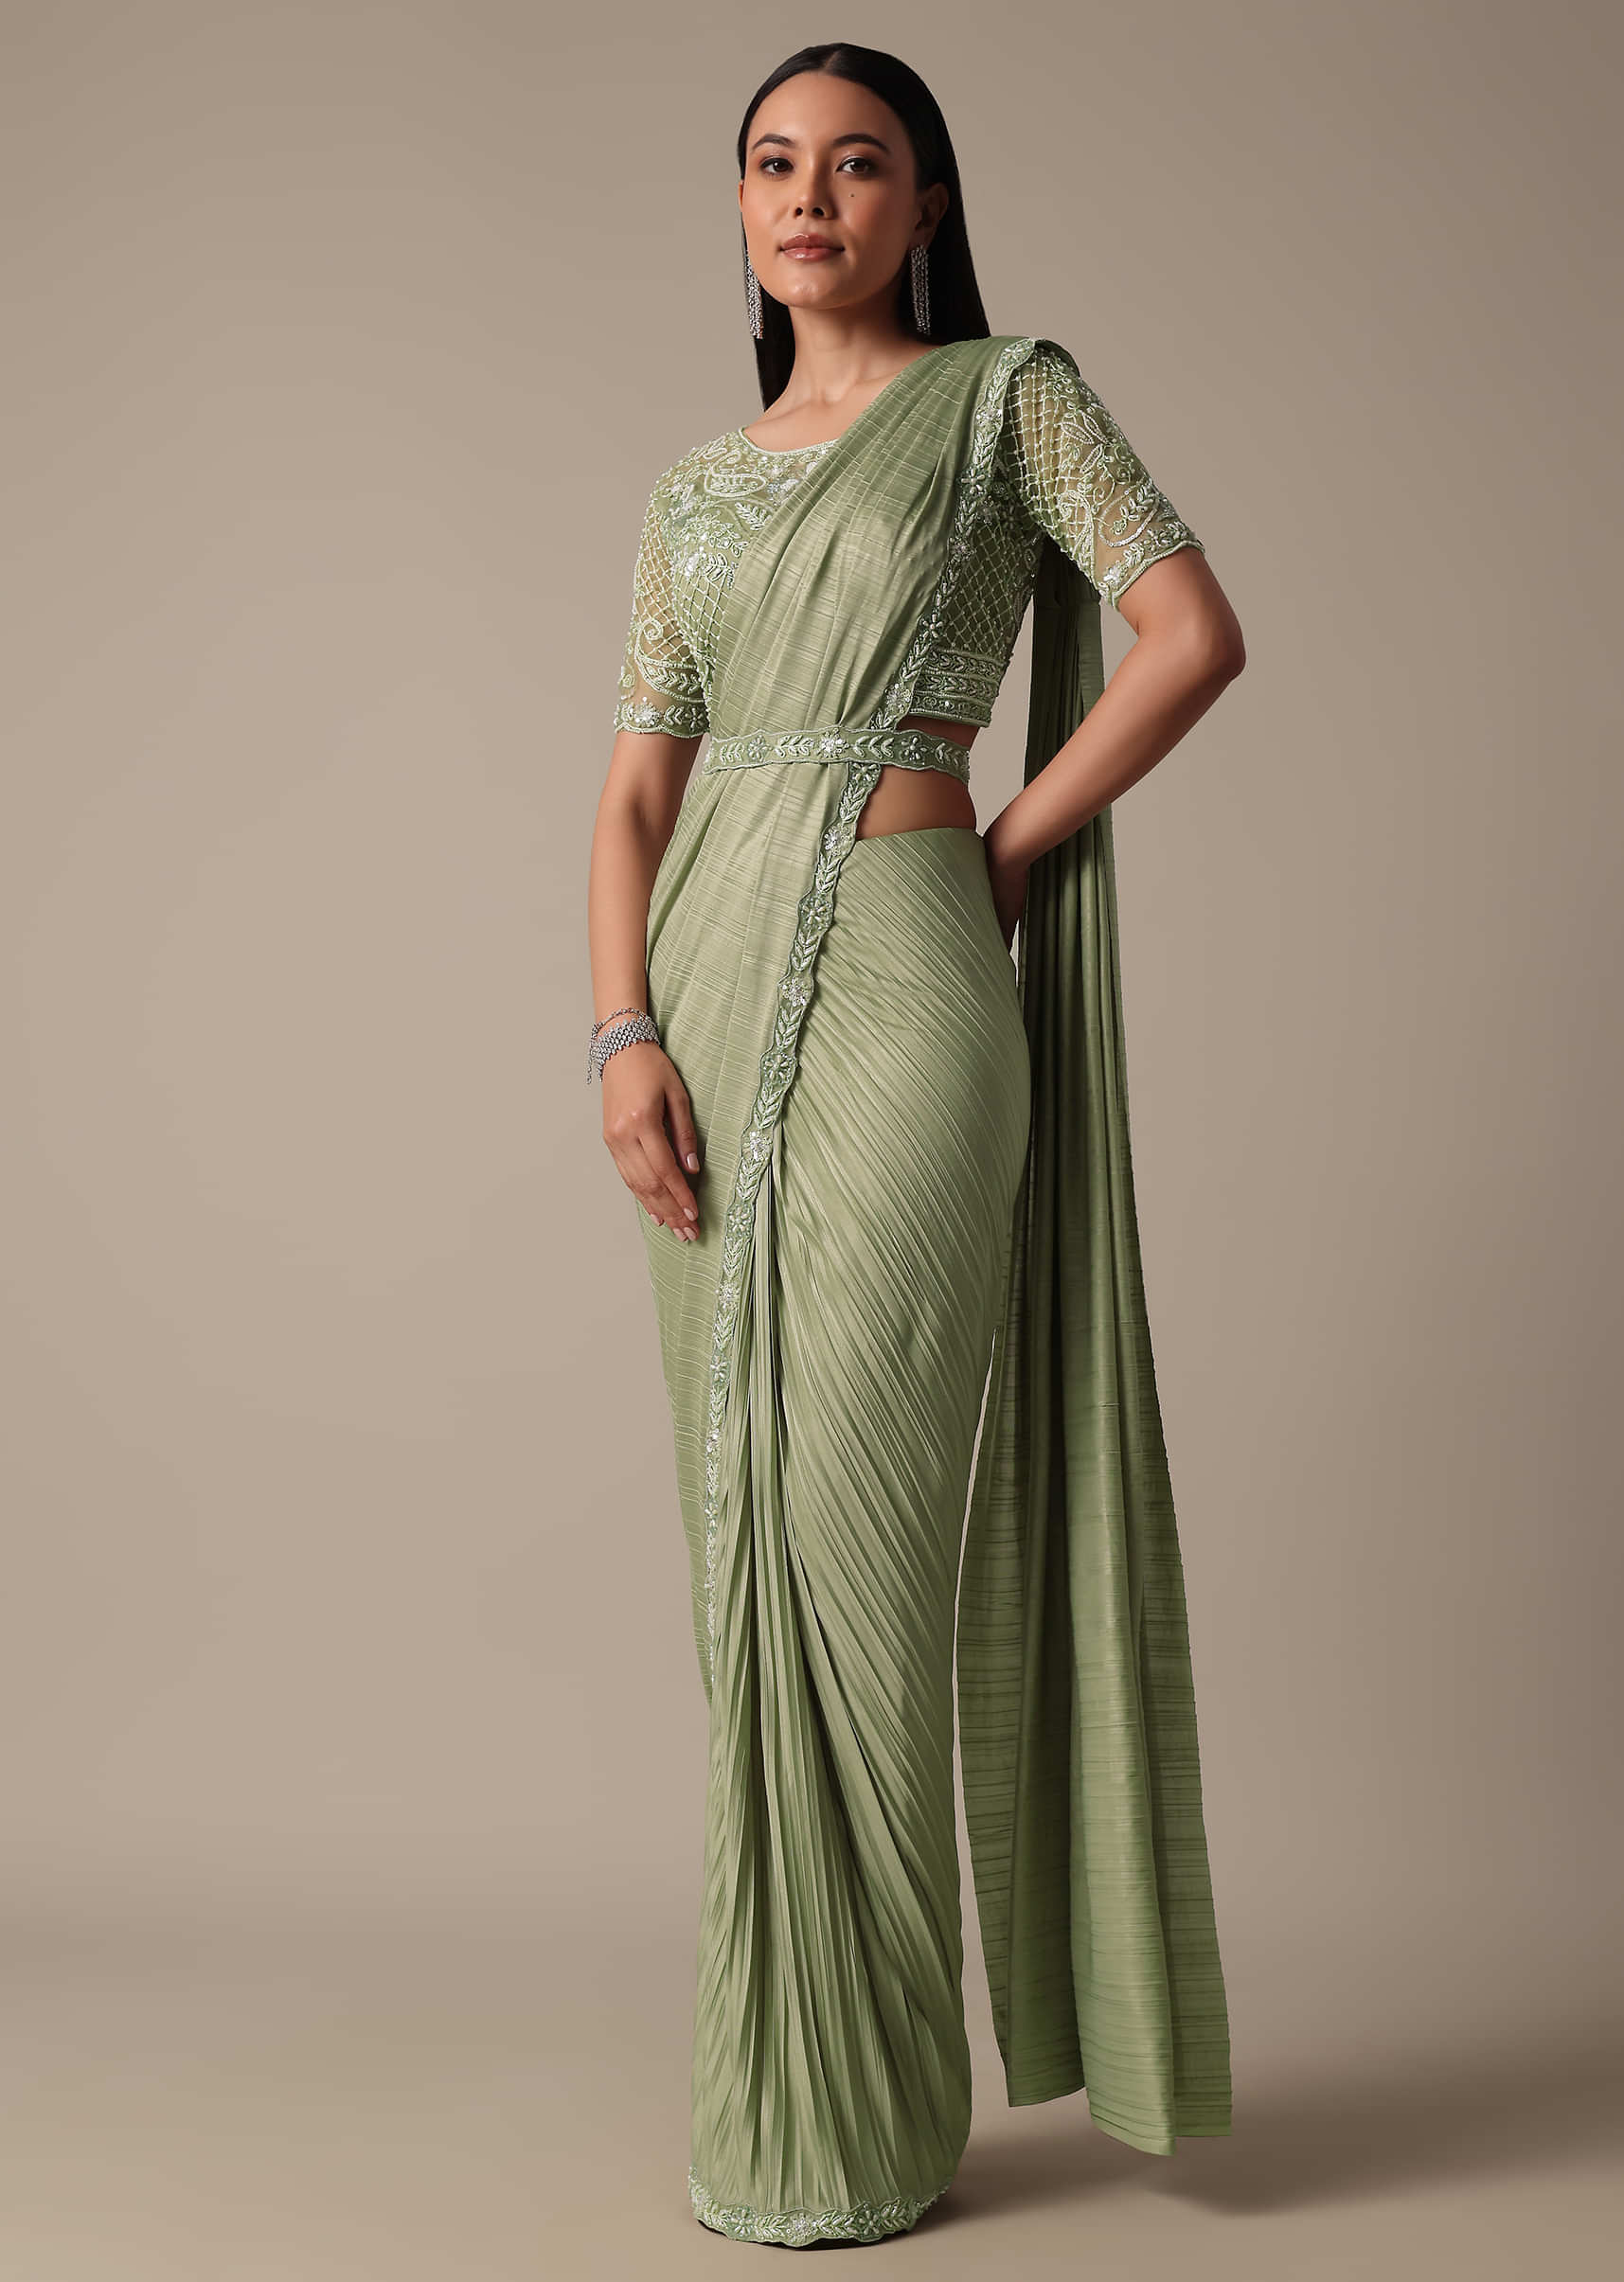 Ready To Wear Sarees - Pre-Stitching Saree Designs Online for